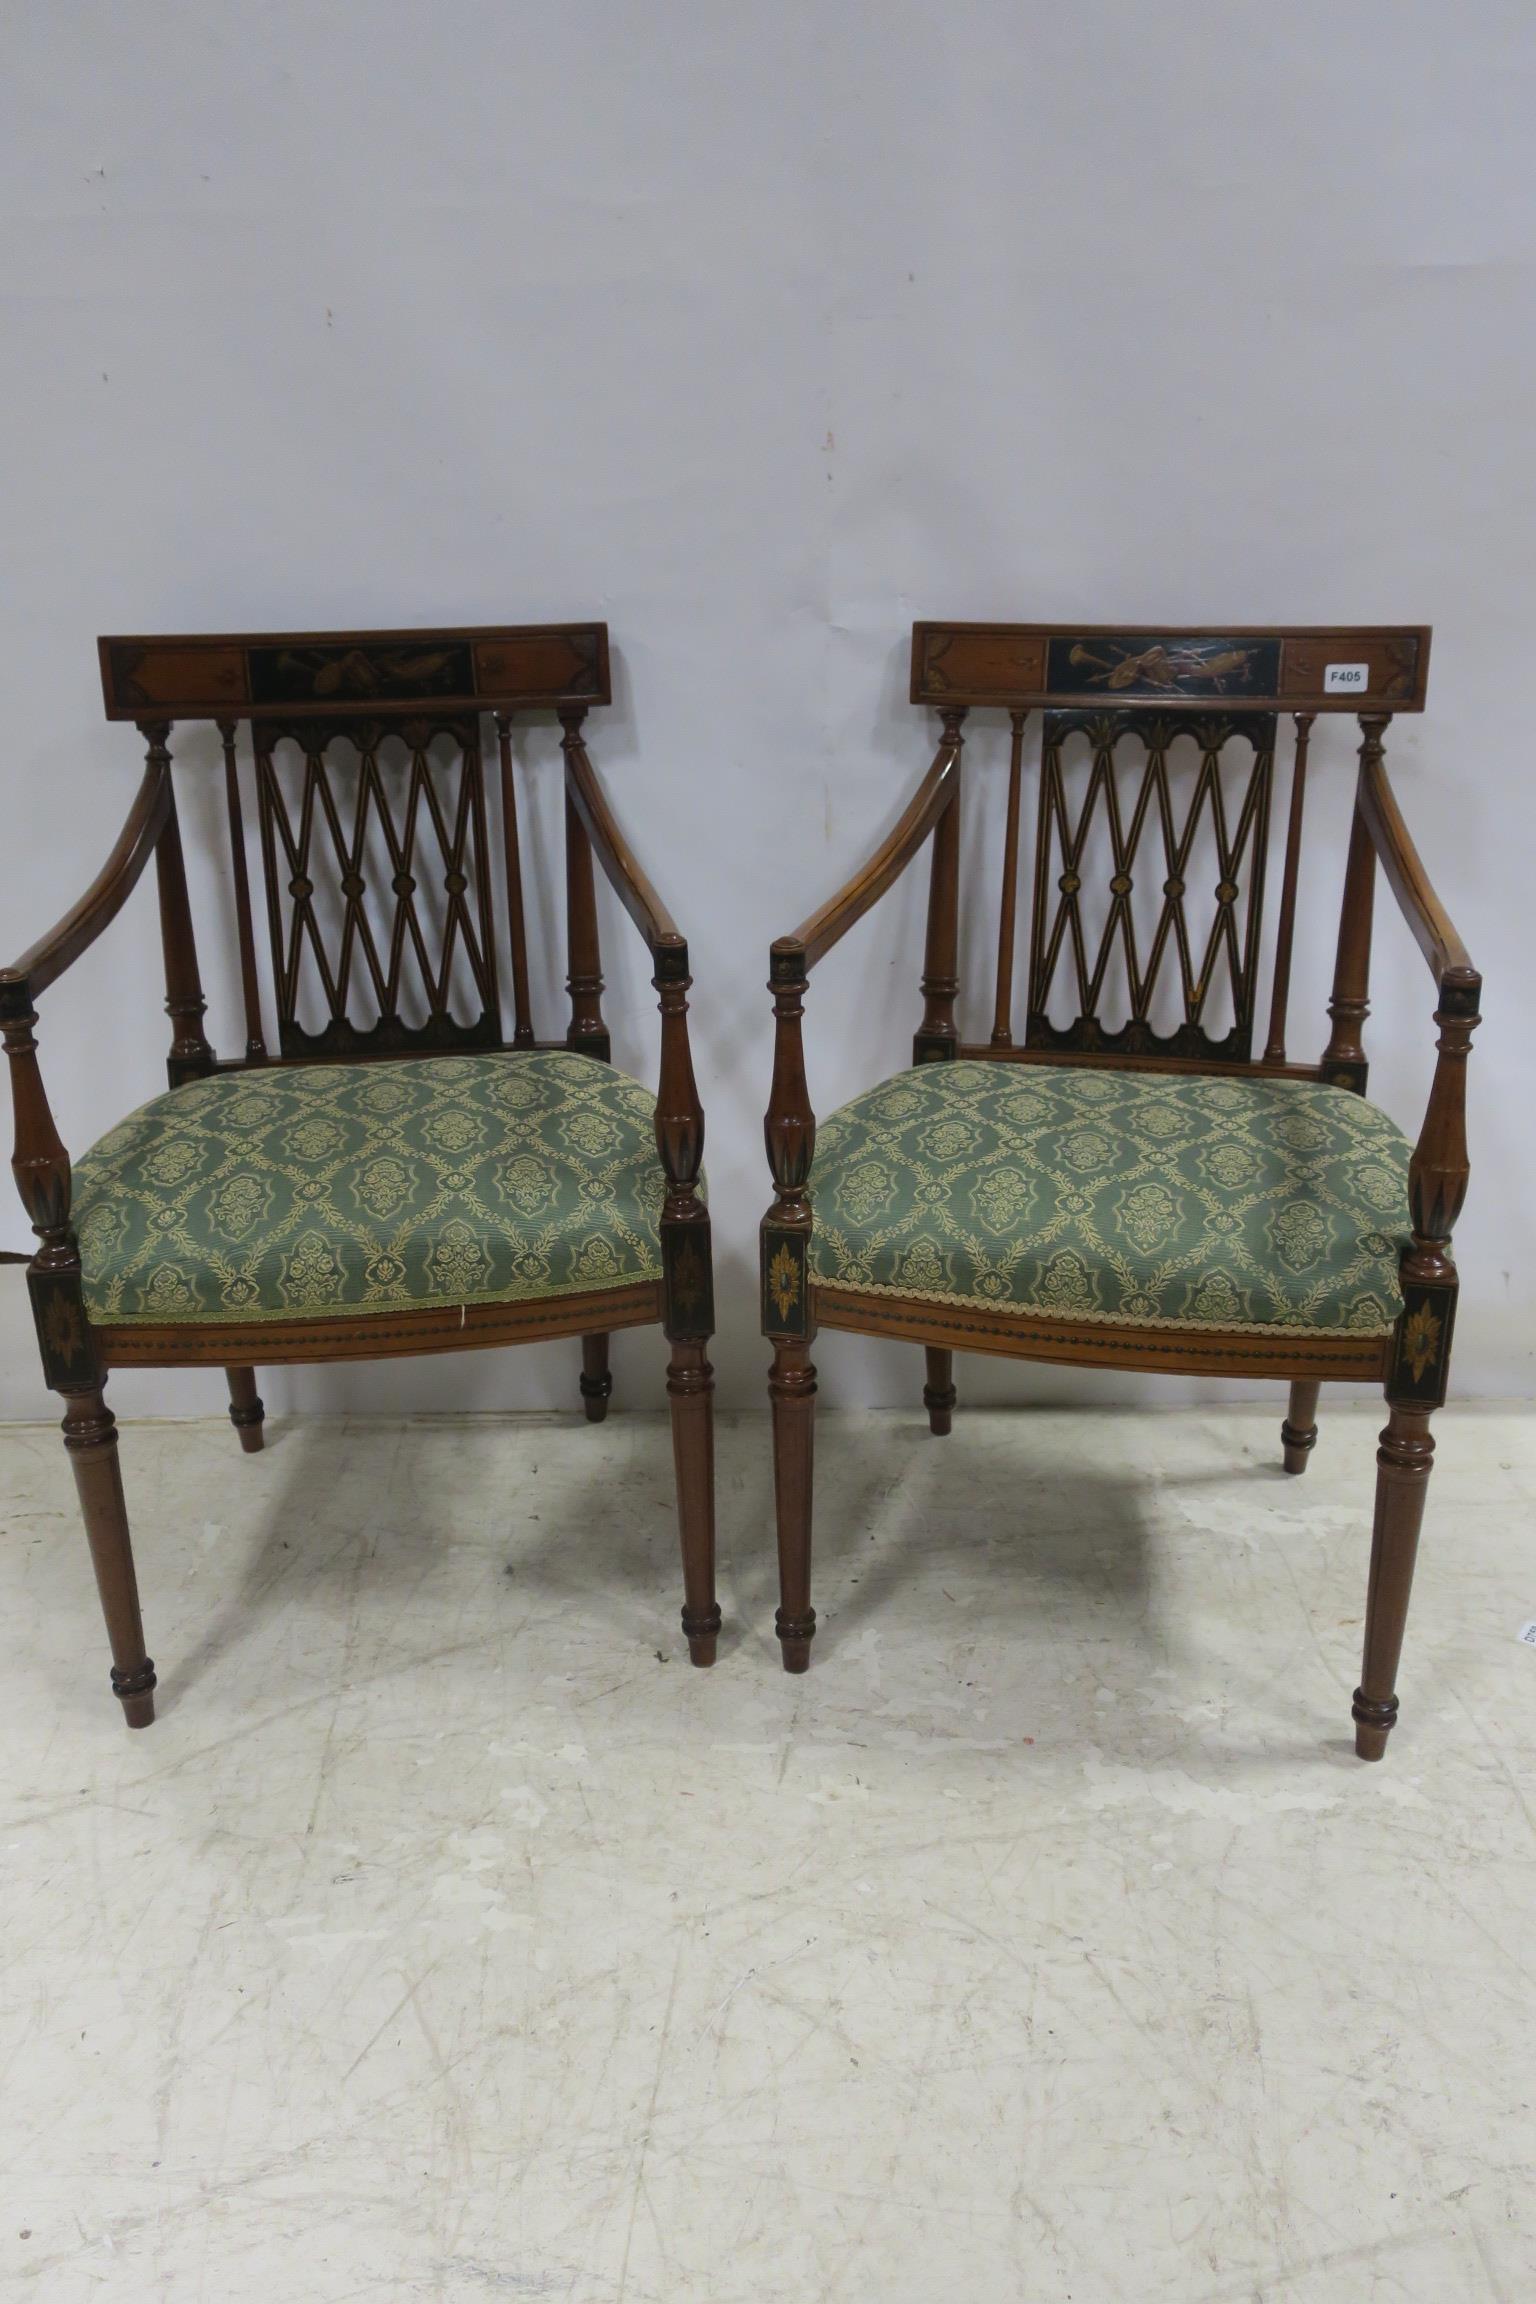 A PAIR OF SATINWOOD AND POLYCHROME ELBOW CHAIRS each with a lattice work pierced splat and